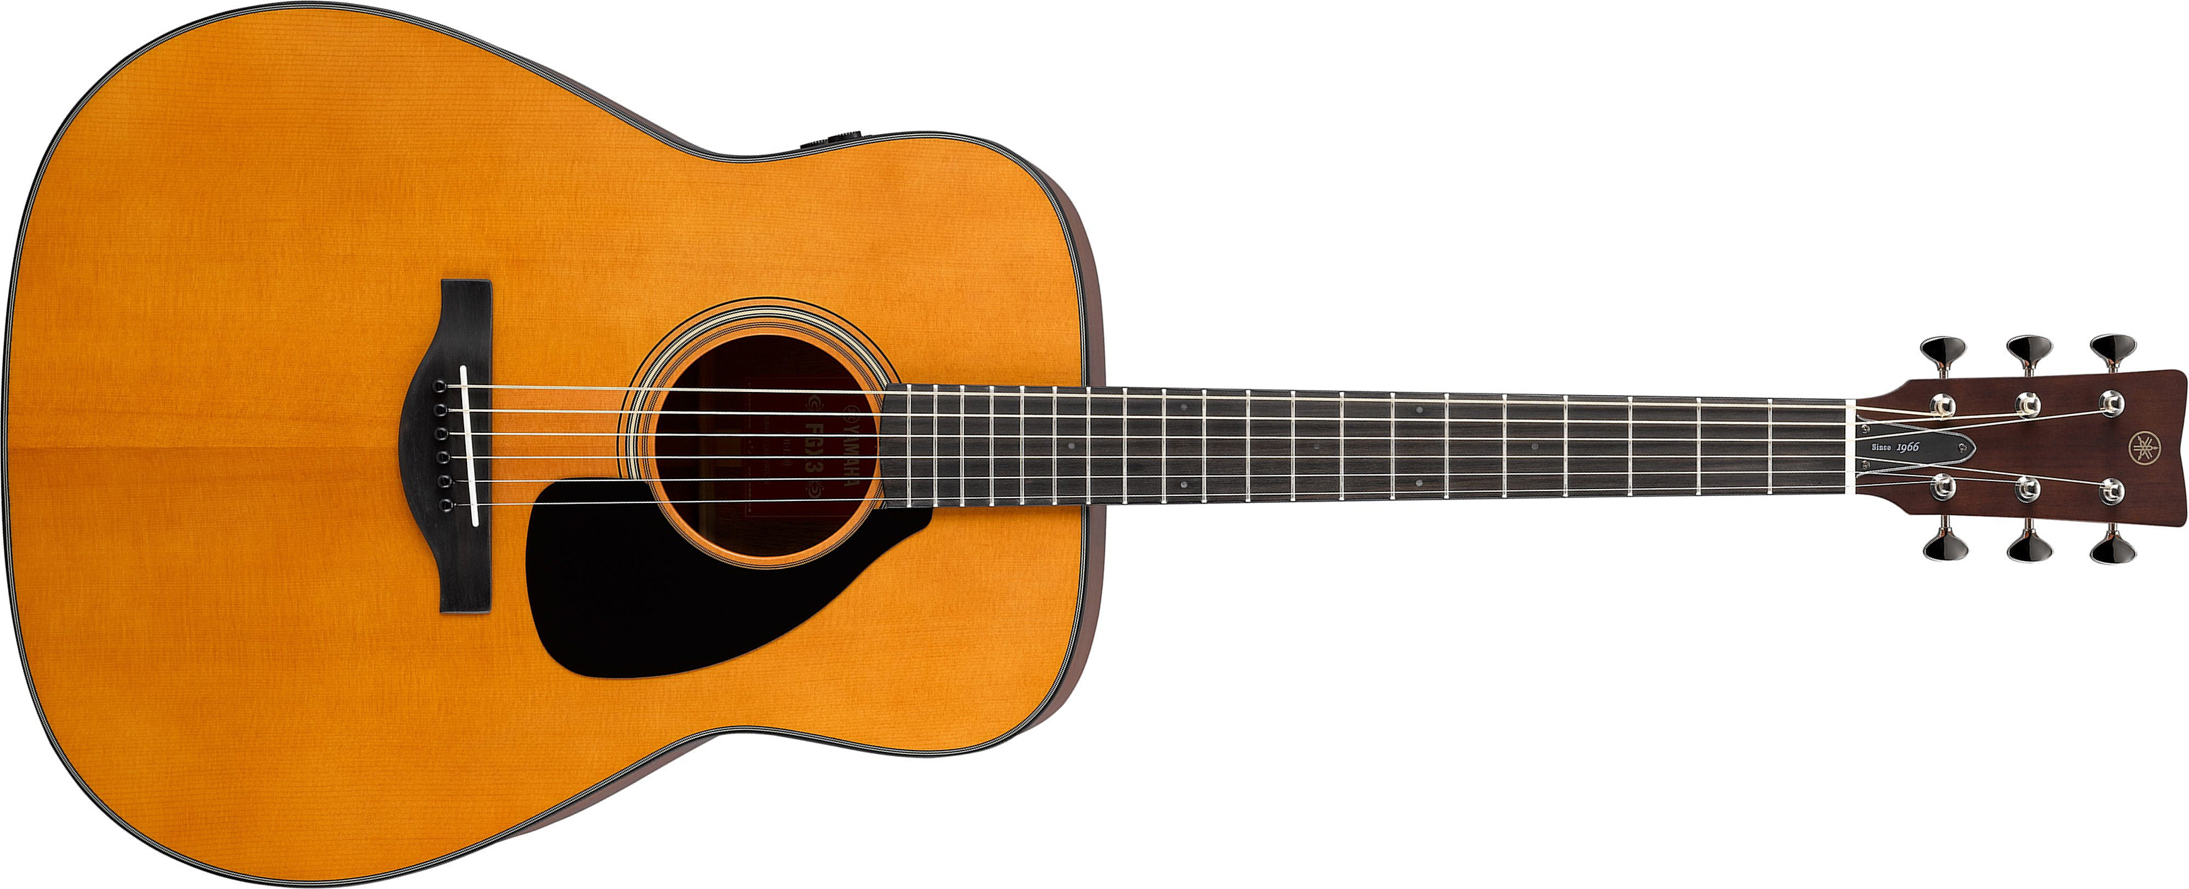 Yamaha Fgx3 Red Label Dreadnought Epicea Palissandre Eb - Heritage Natural - Acoustic guitar & electro - Main picture